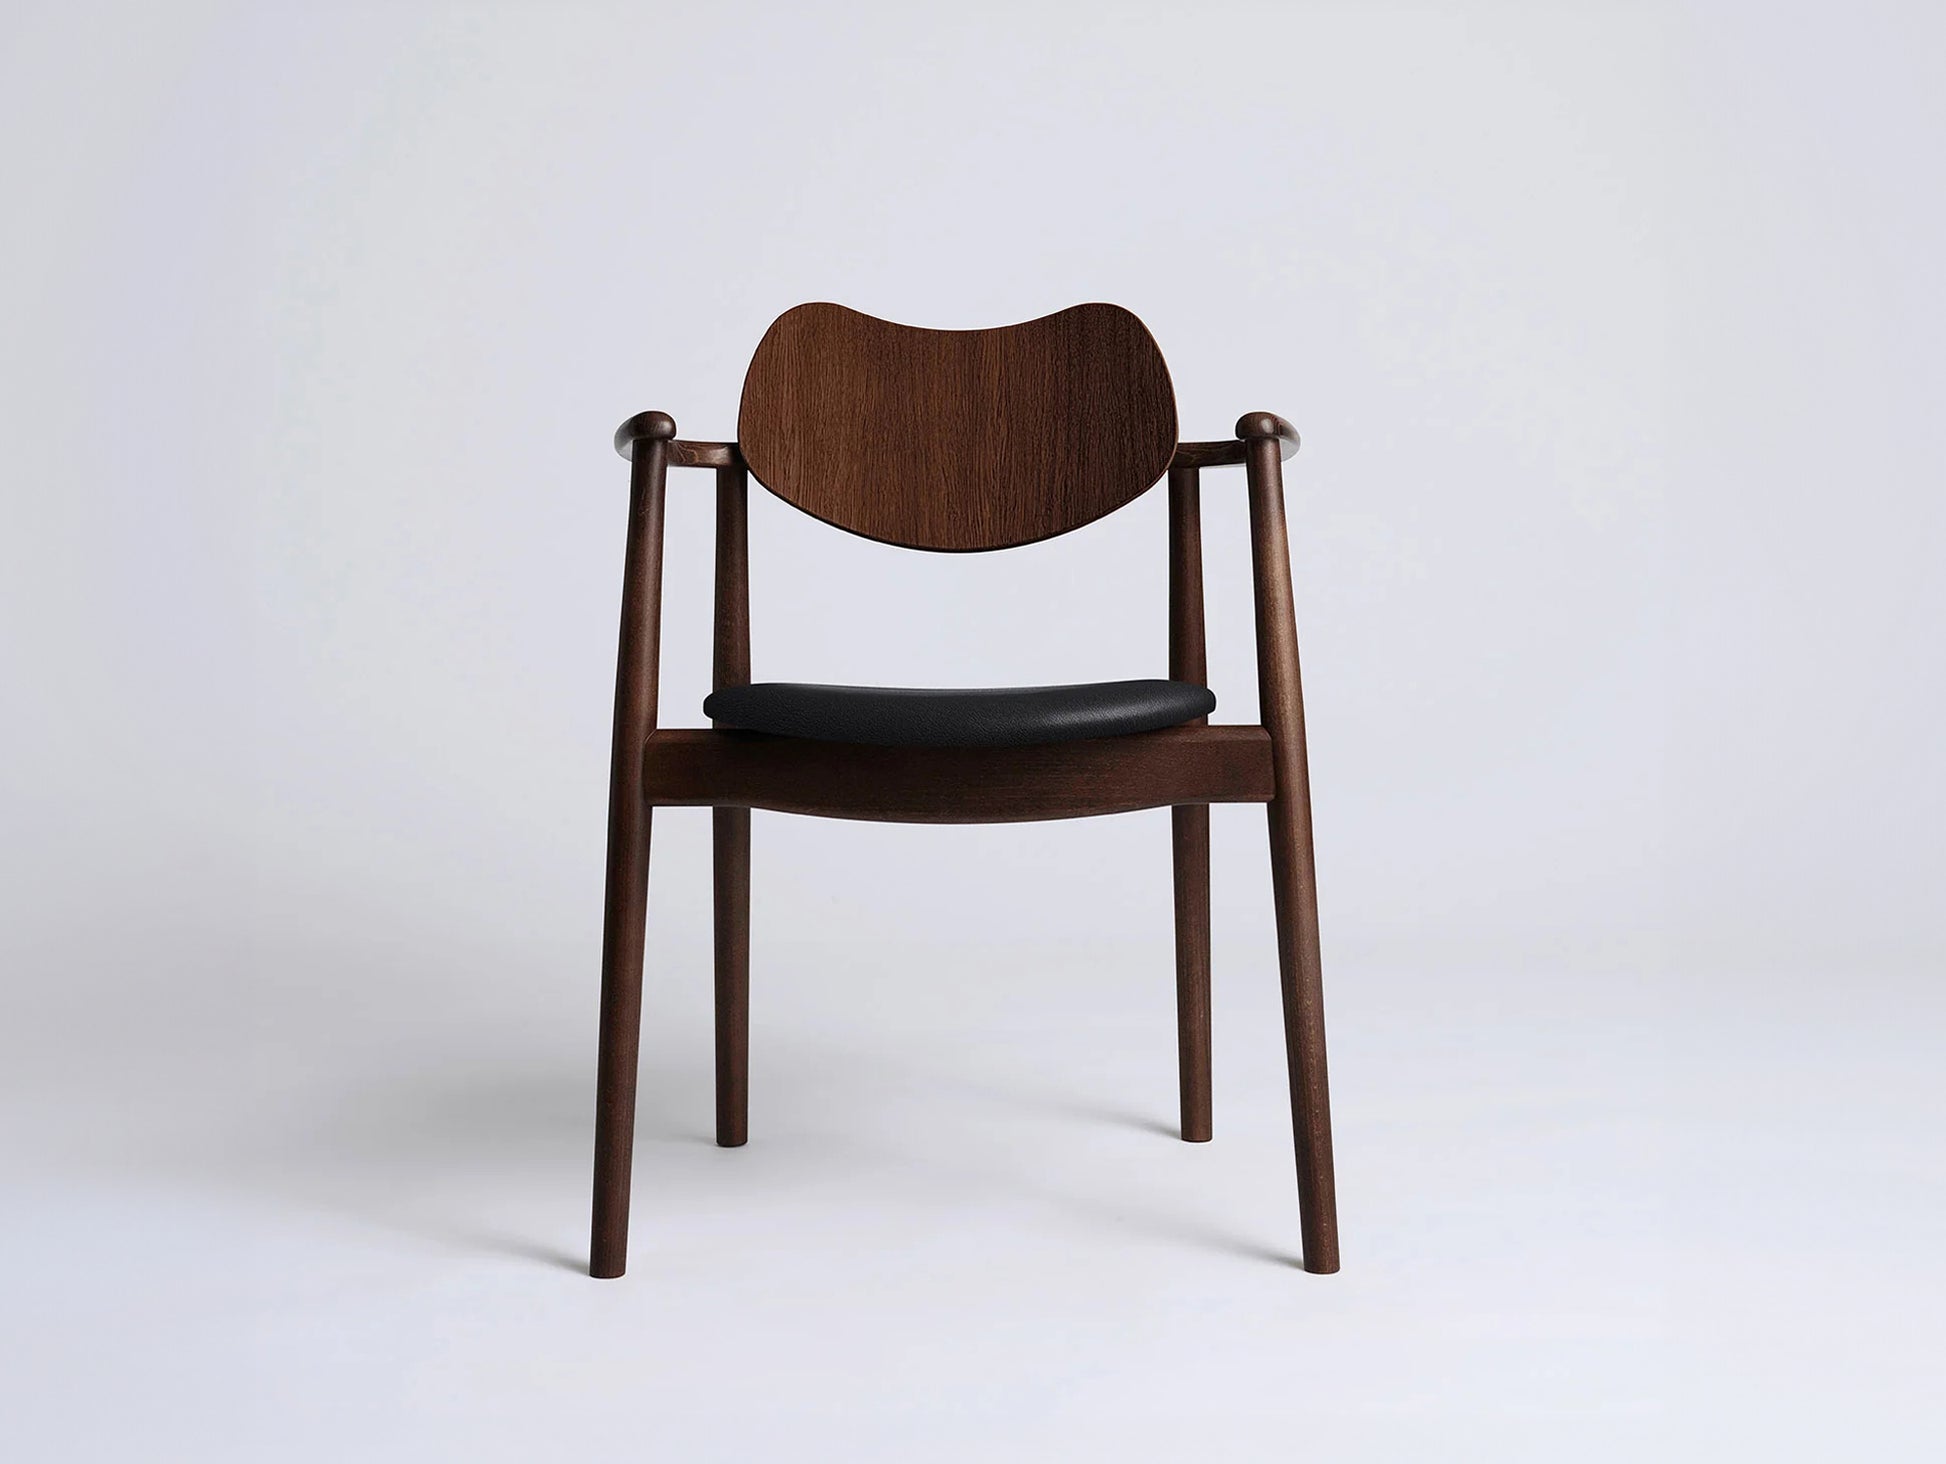 Regatta Chair Seat Upholstered by Ro Collection - Walnut Stained Beech / Standard Black Leather